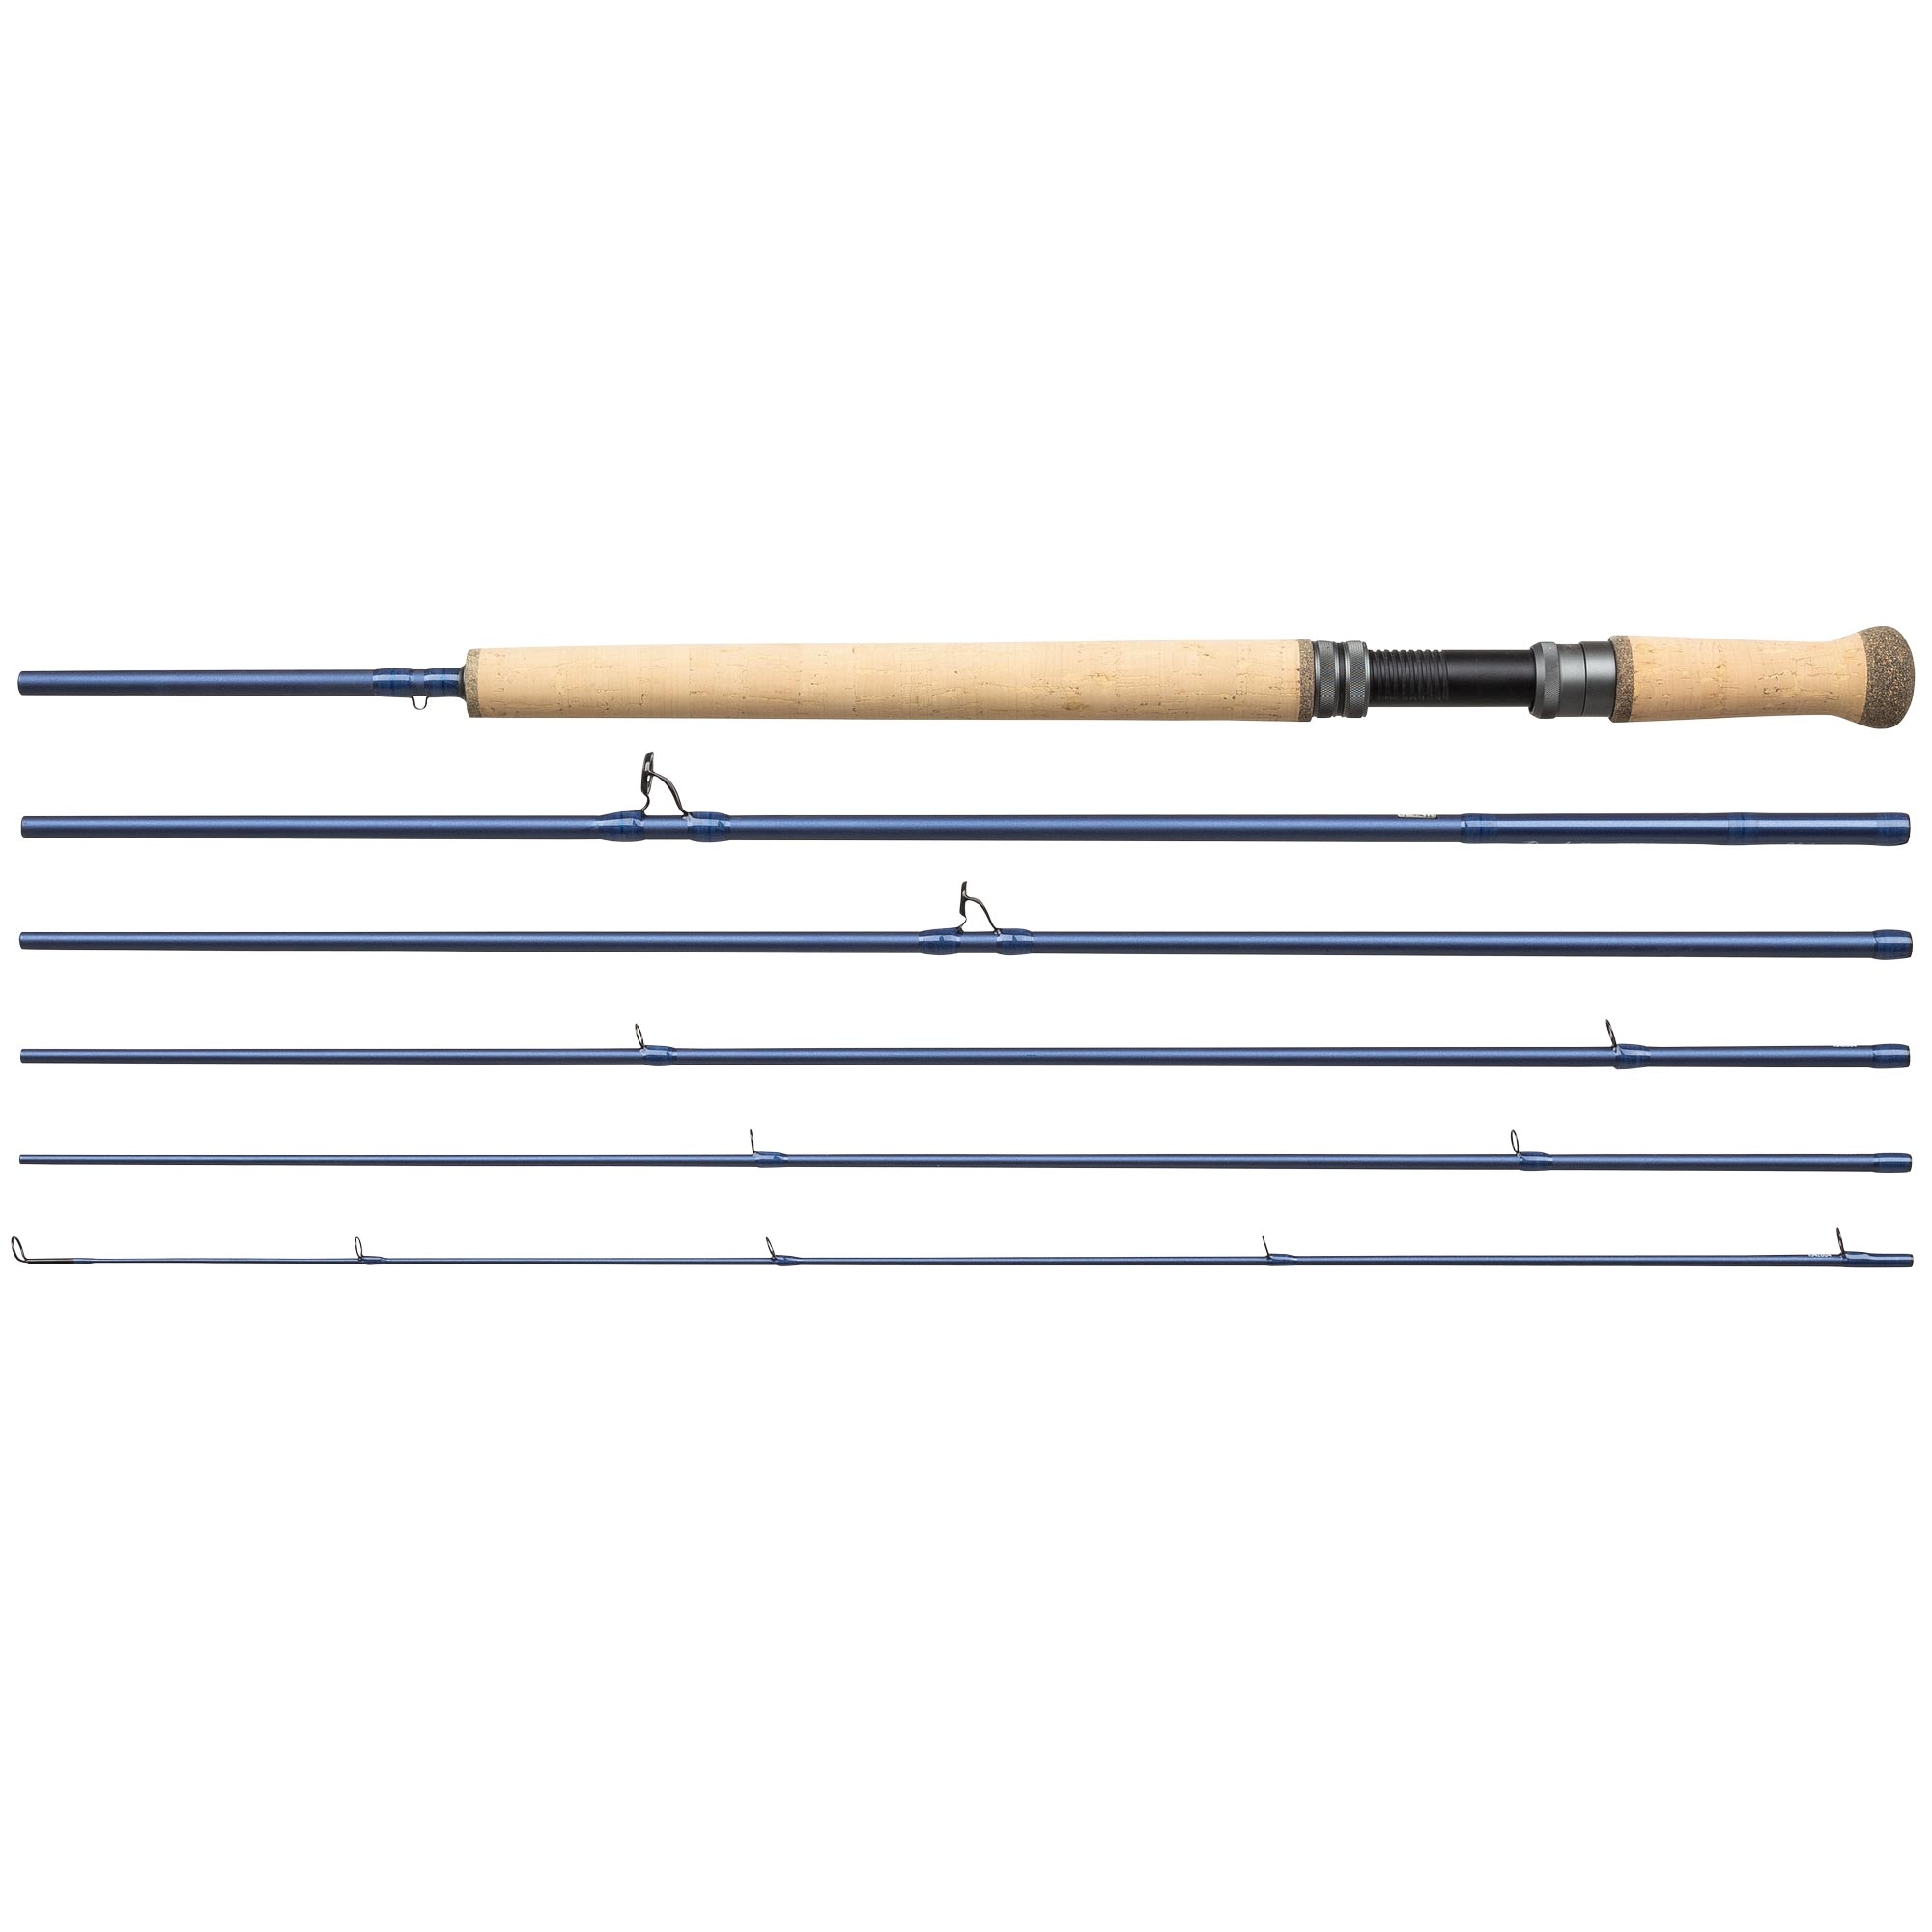 Shakespeare New Oracle 2 Spey Salmon Fly Fishing Rods - All Models